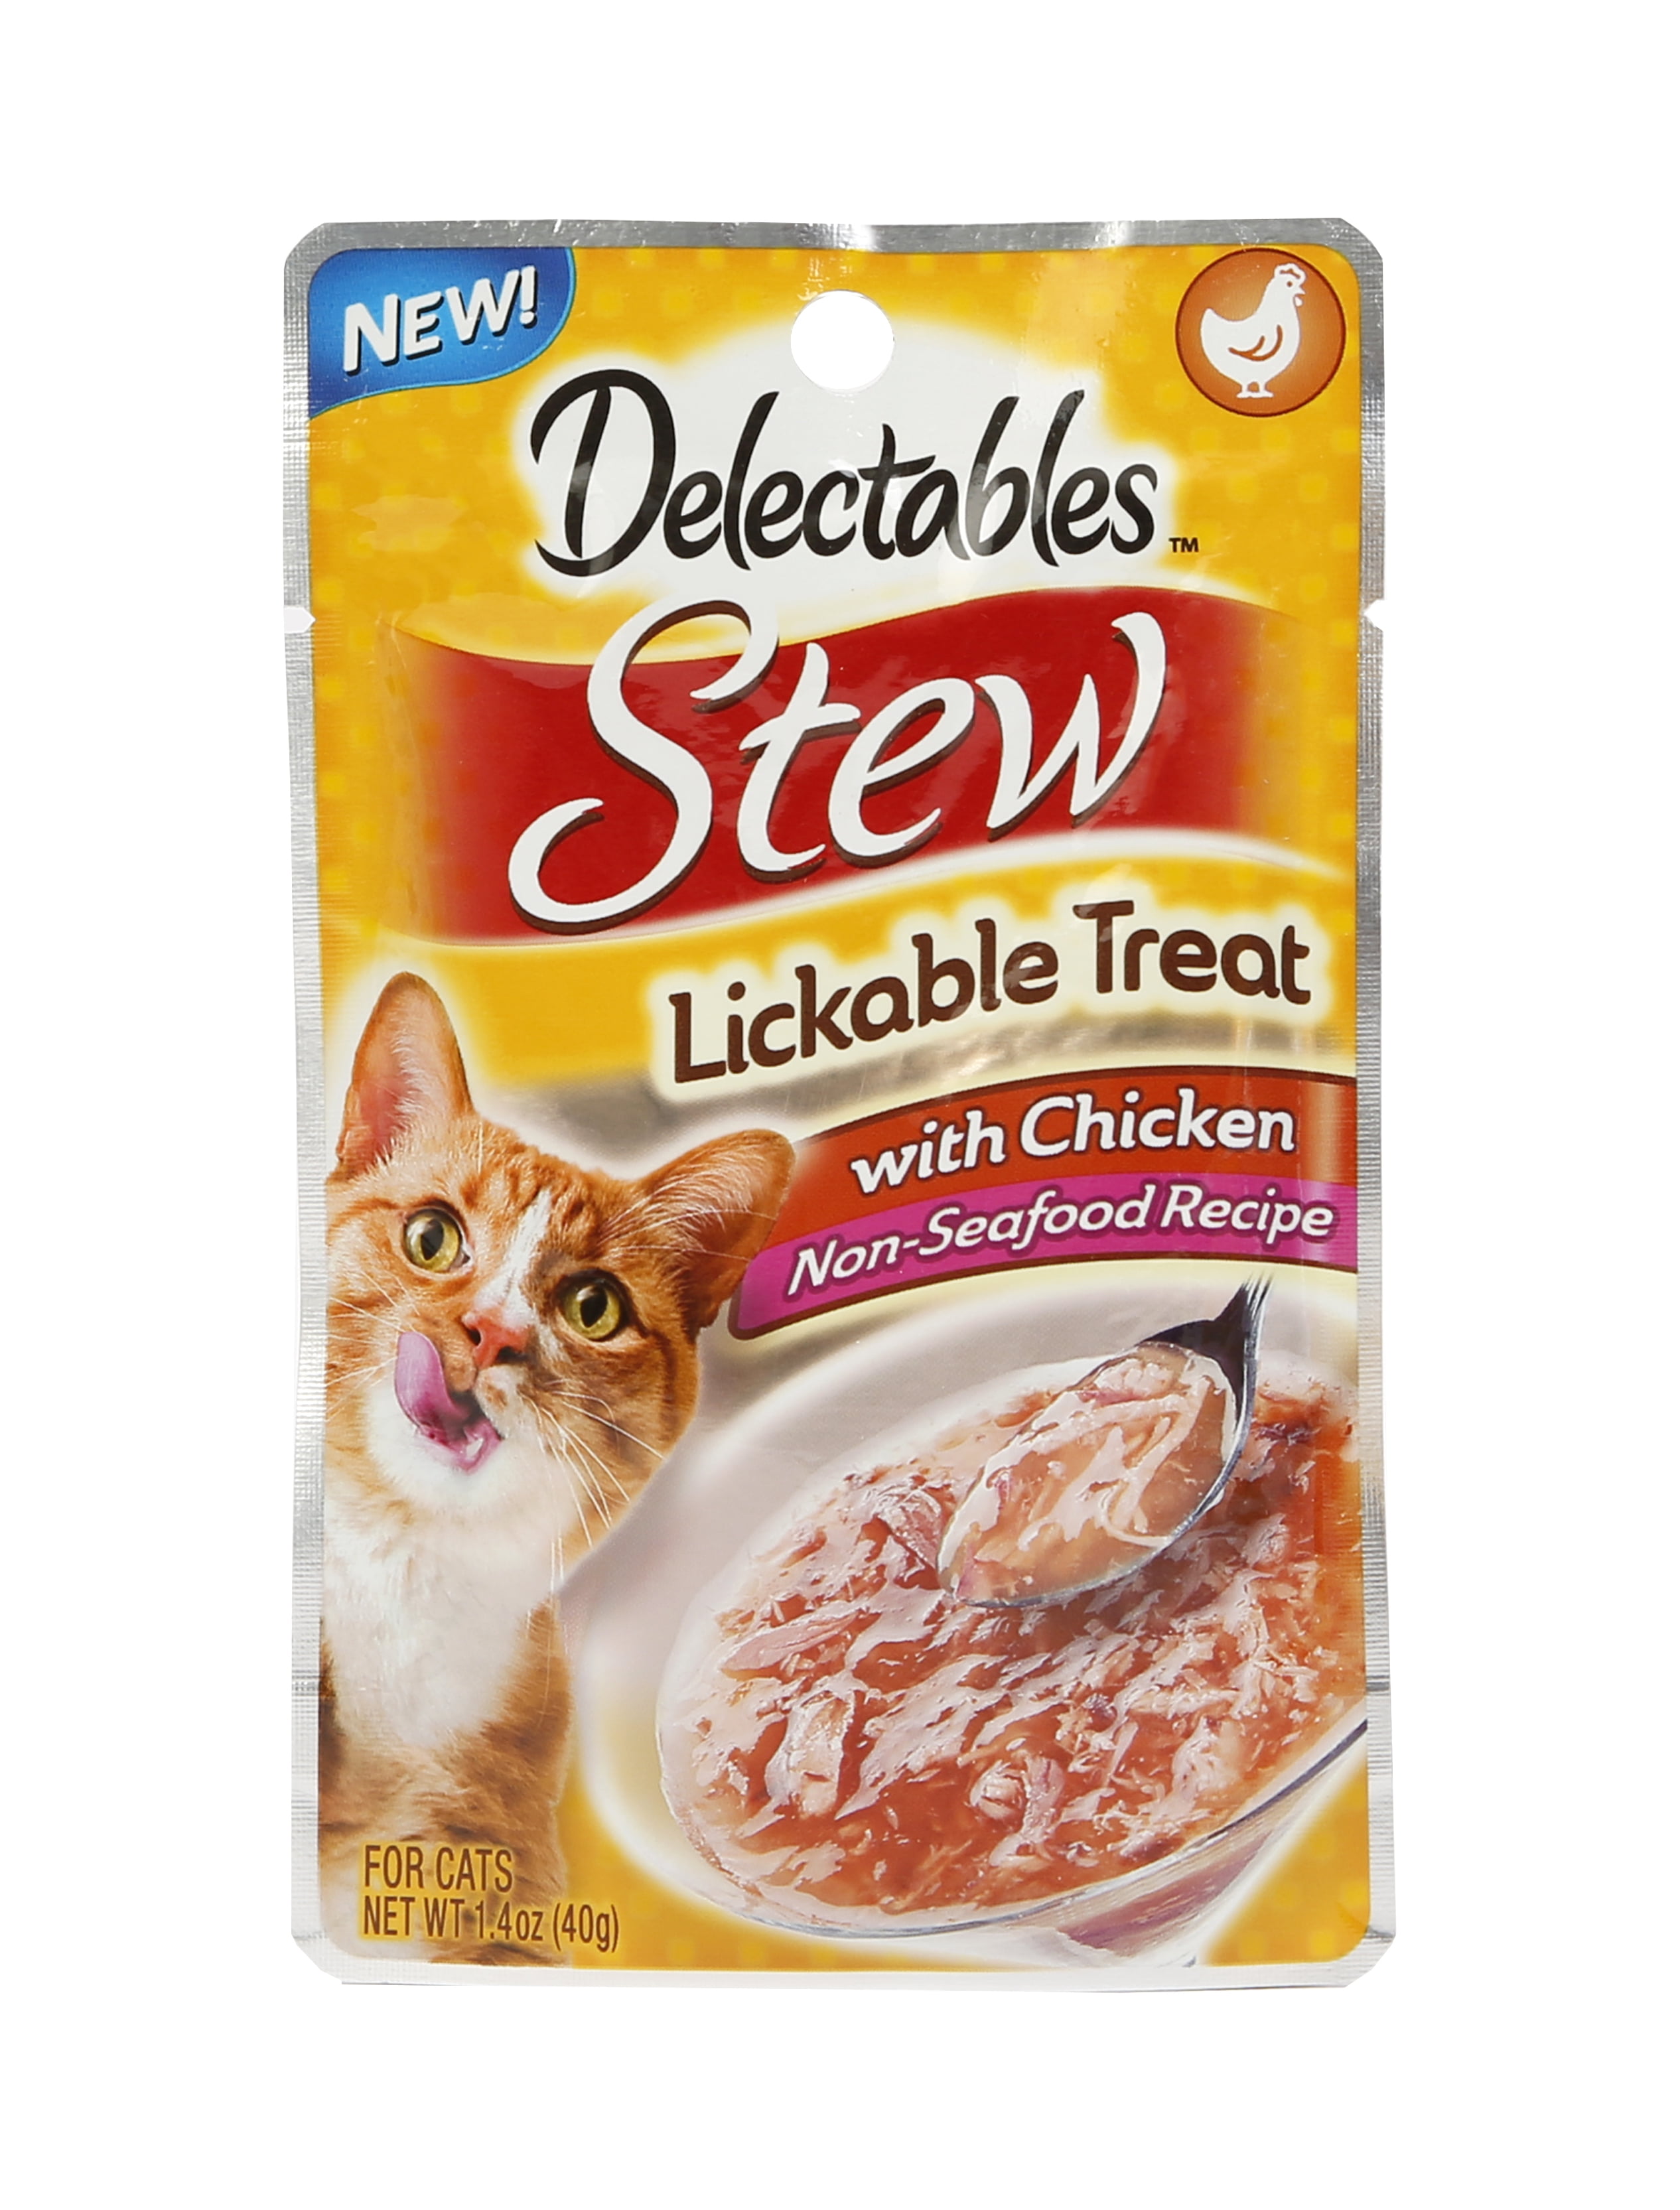 Delectables Stew NonSeafood Recipe with Chicken 12 pack